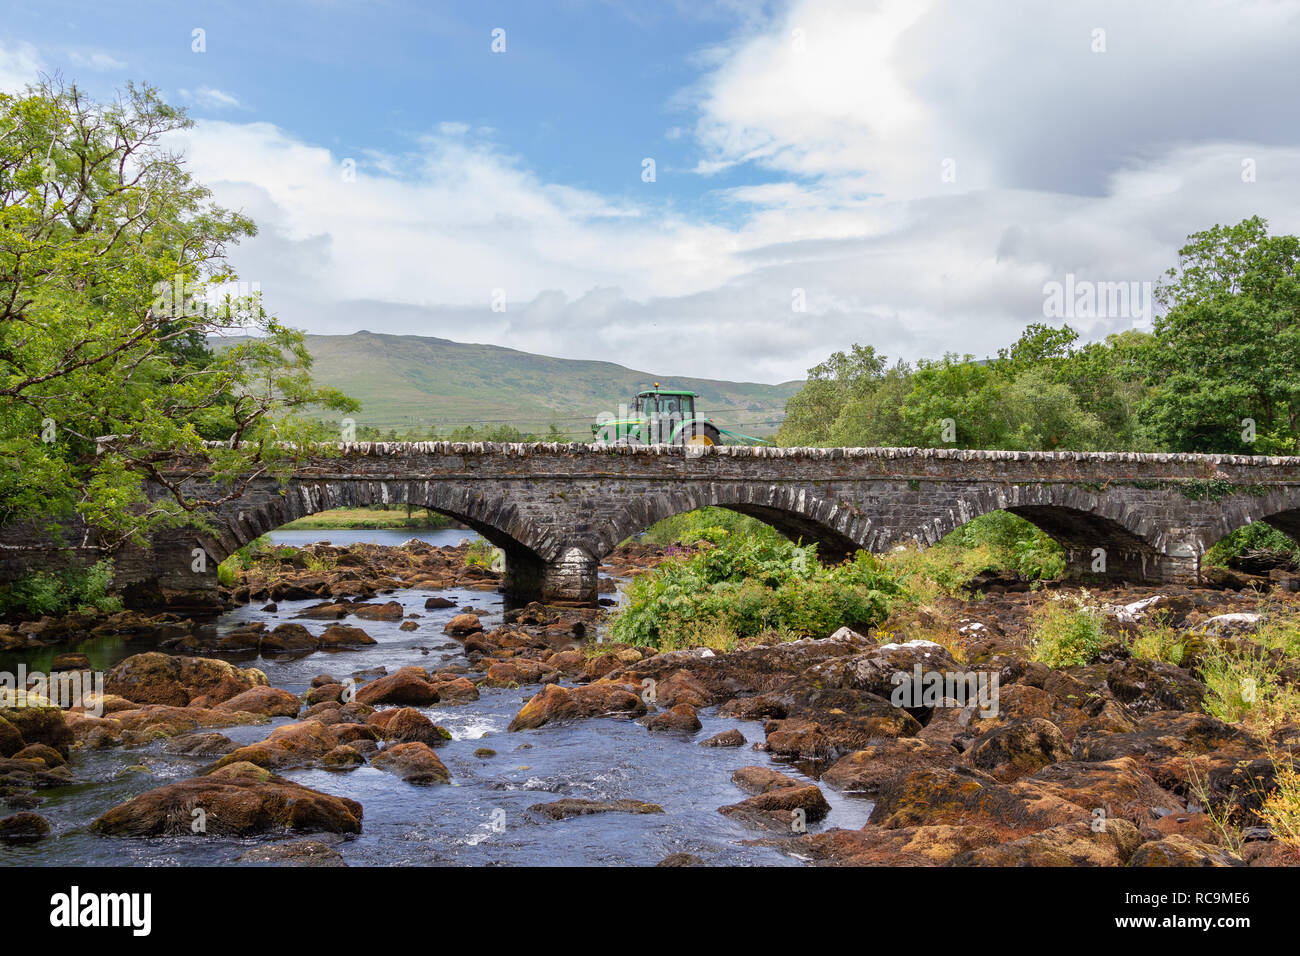 Tractor on the Blackstones Bridge over the Upper Caragh River, Ring of Kerry, Ireland Stock Photo